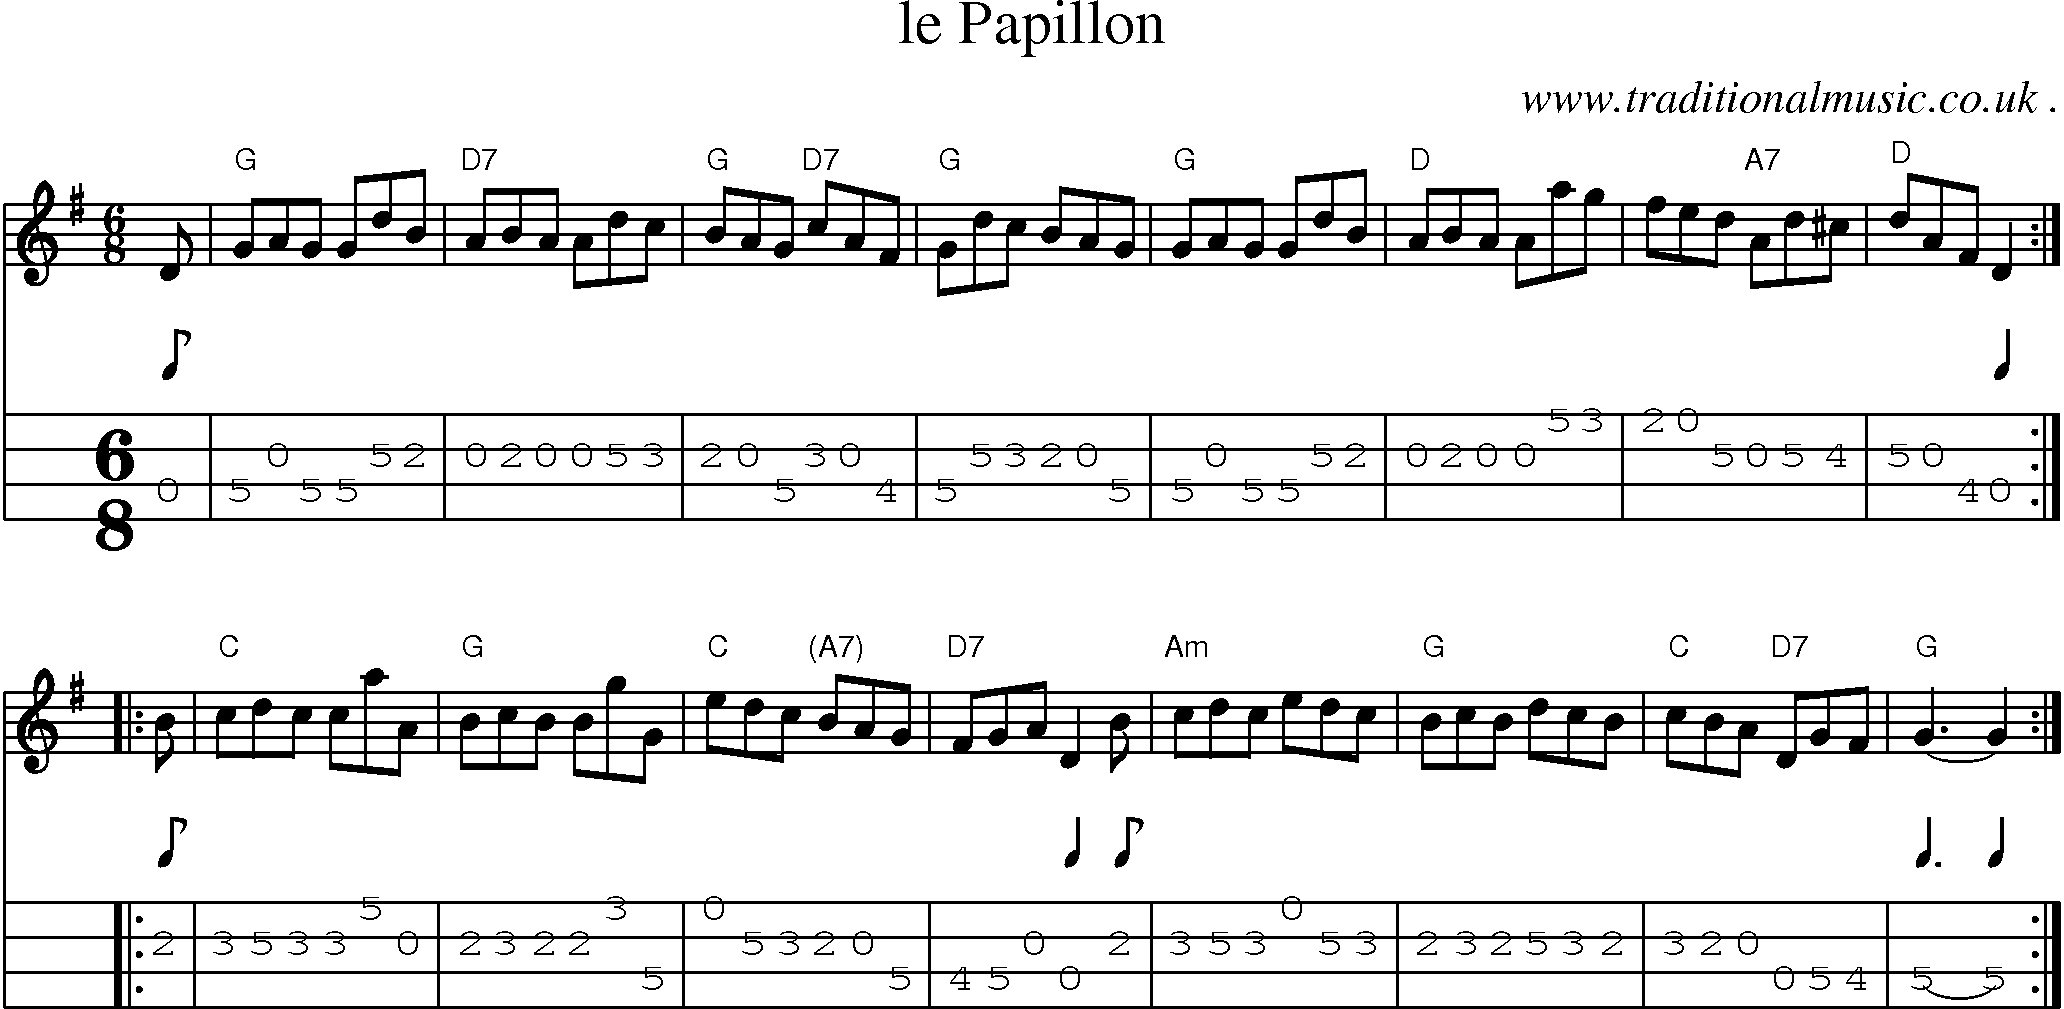 Sheet-music  score, Chords and Mandolin Tabs for Le Papillon